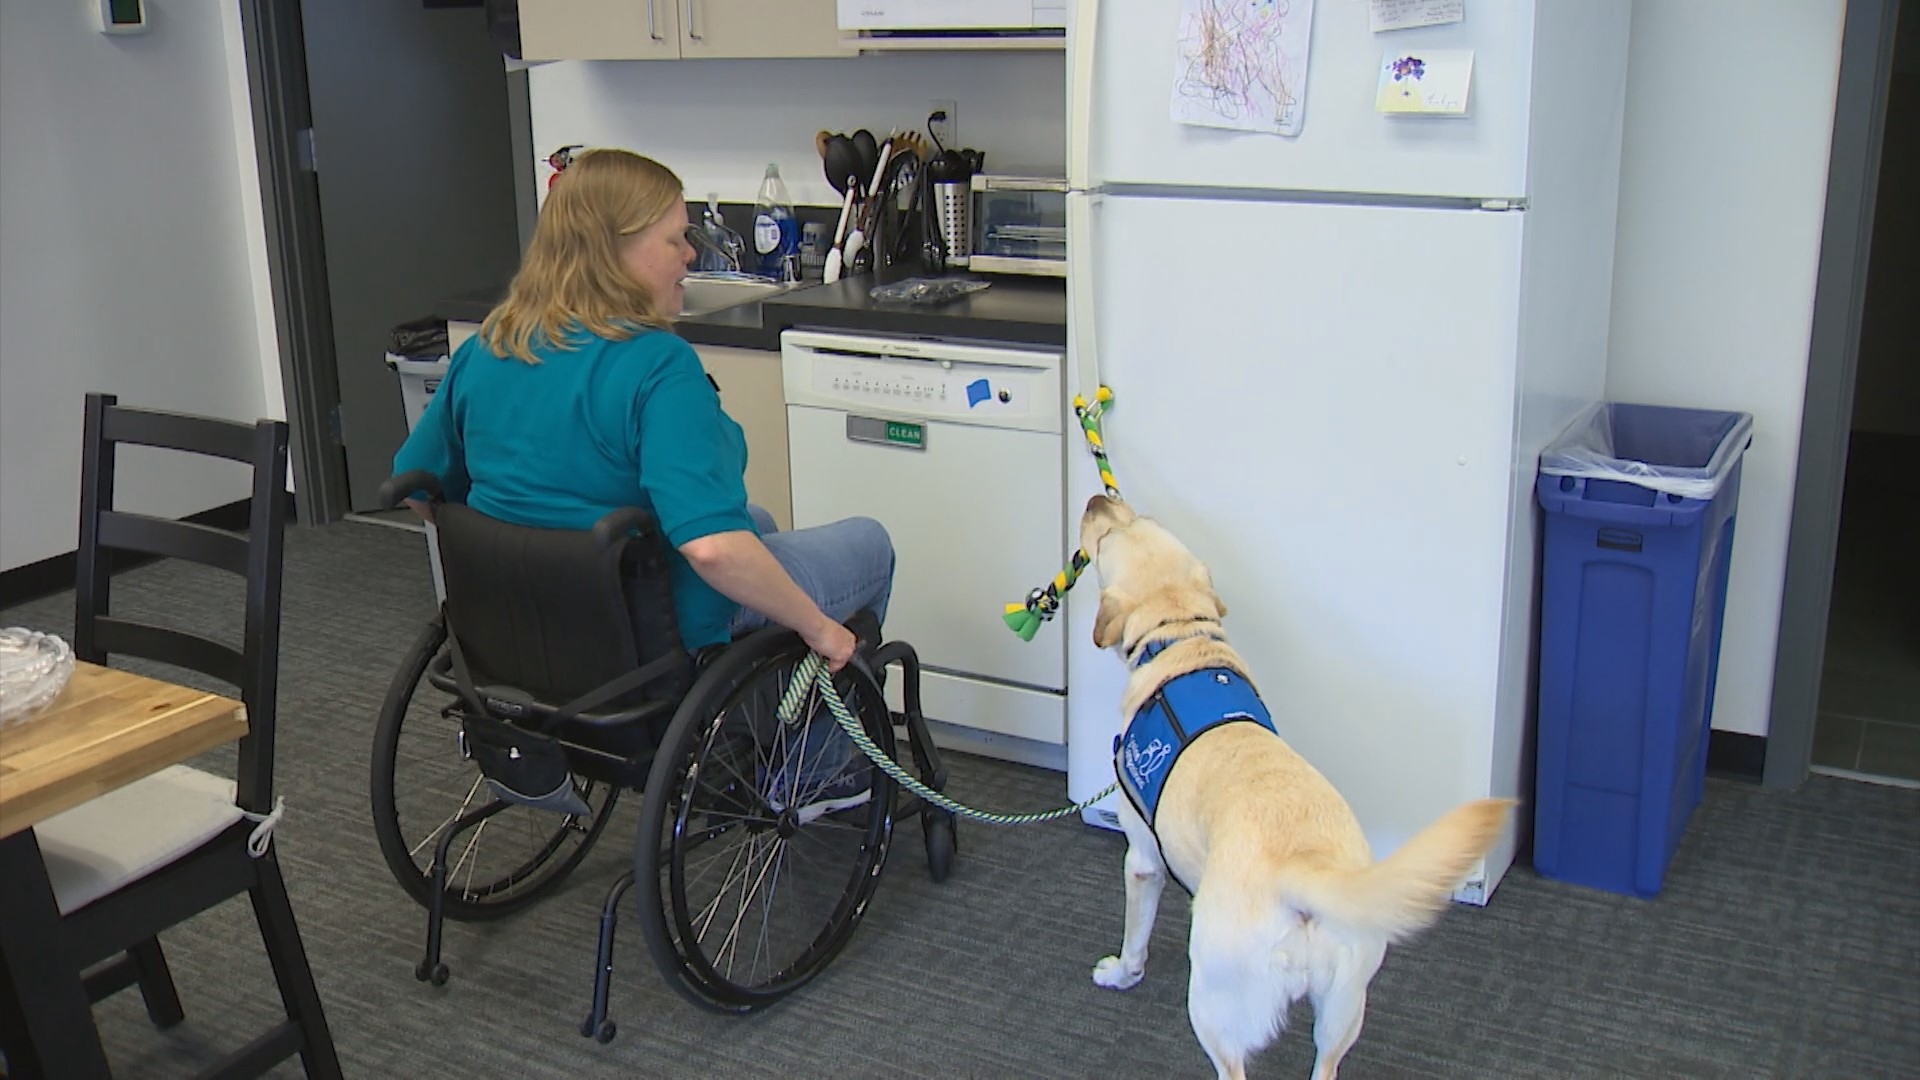 Toffee is showing off some skills that help people live independently, which she learned with Canine Companions